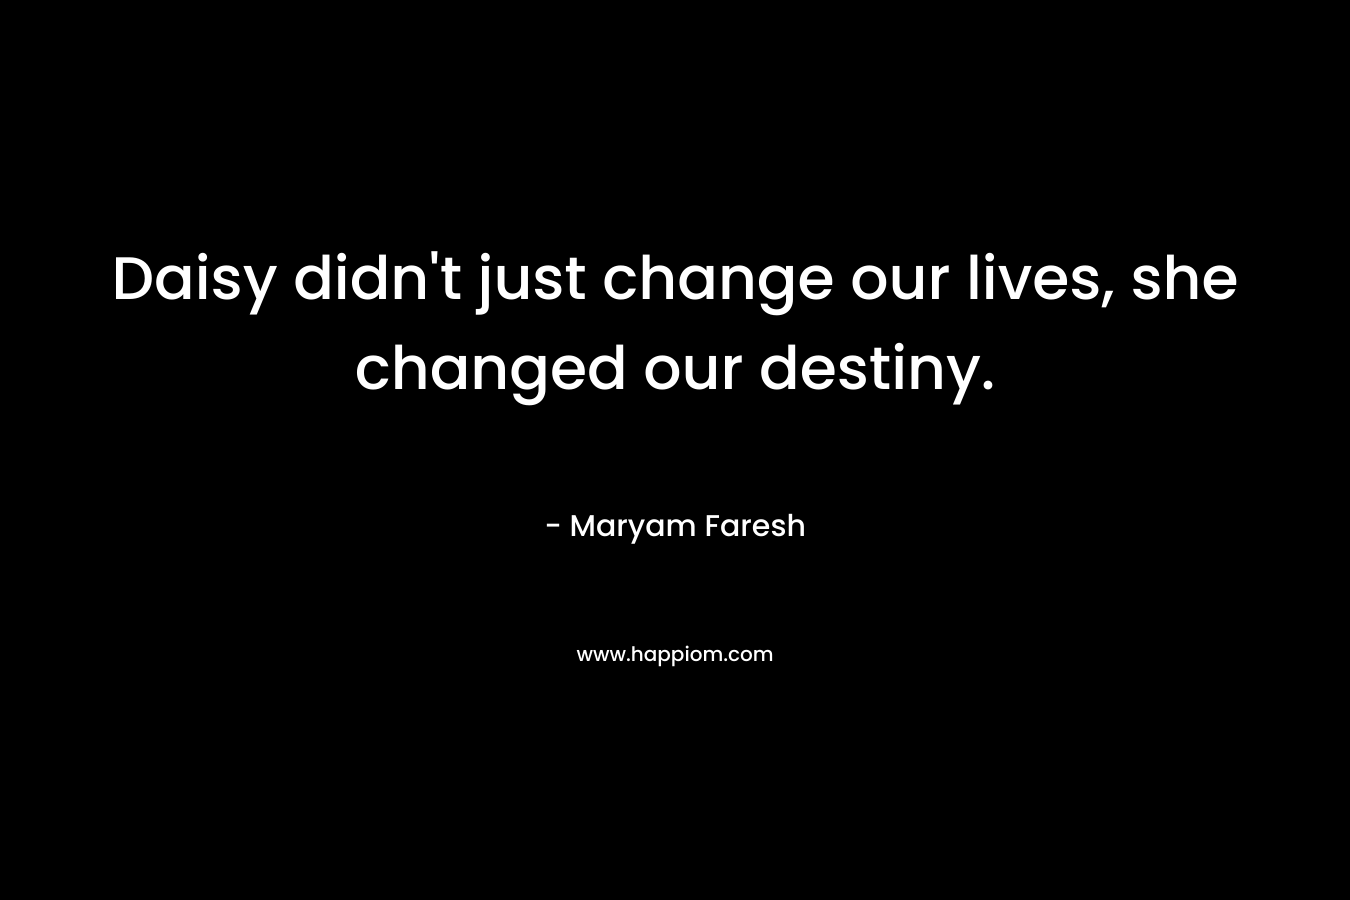 Daisy didn’t just change our lives, she changed our destiny. – Maryam Faresh